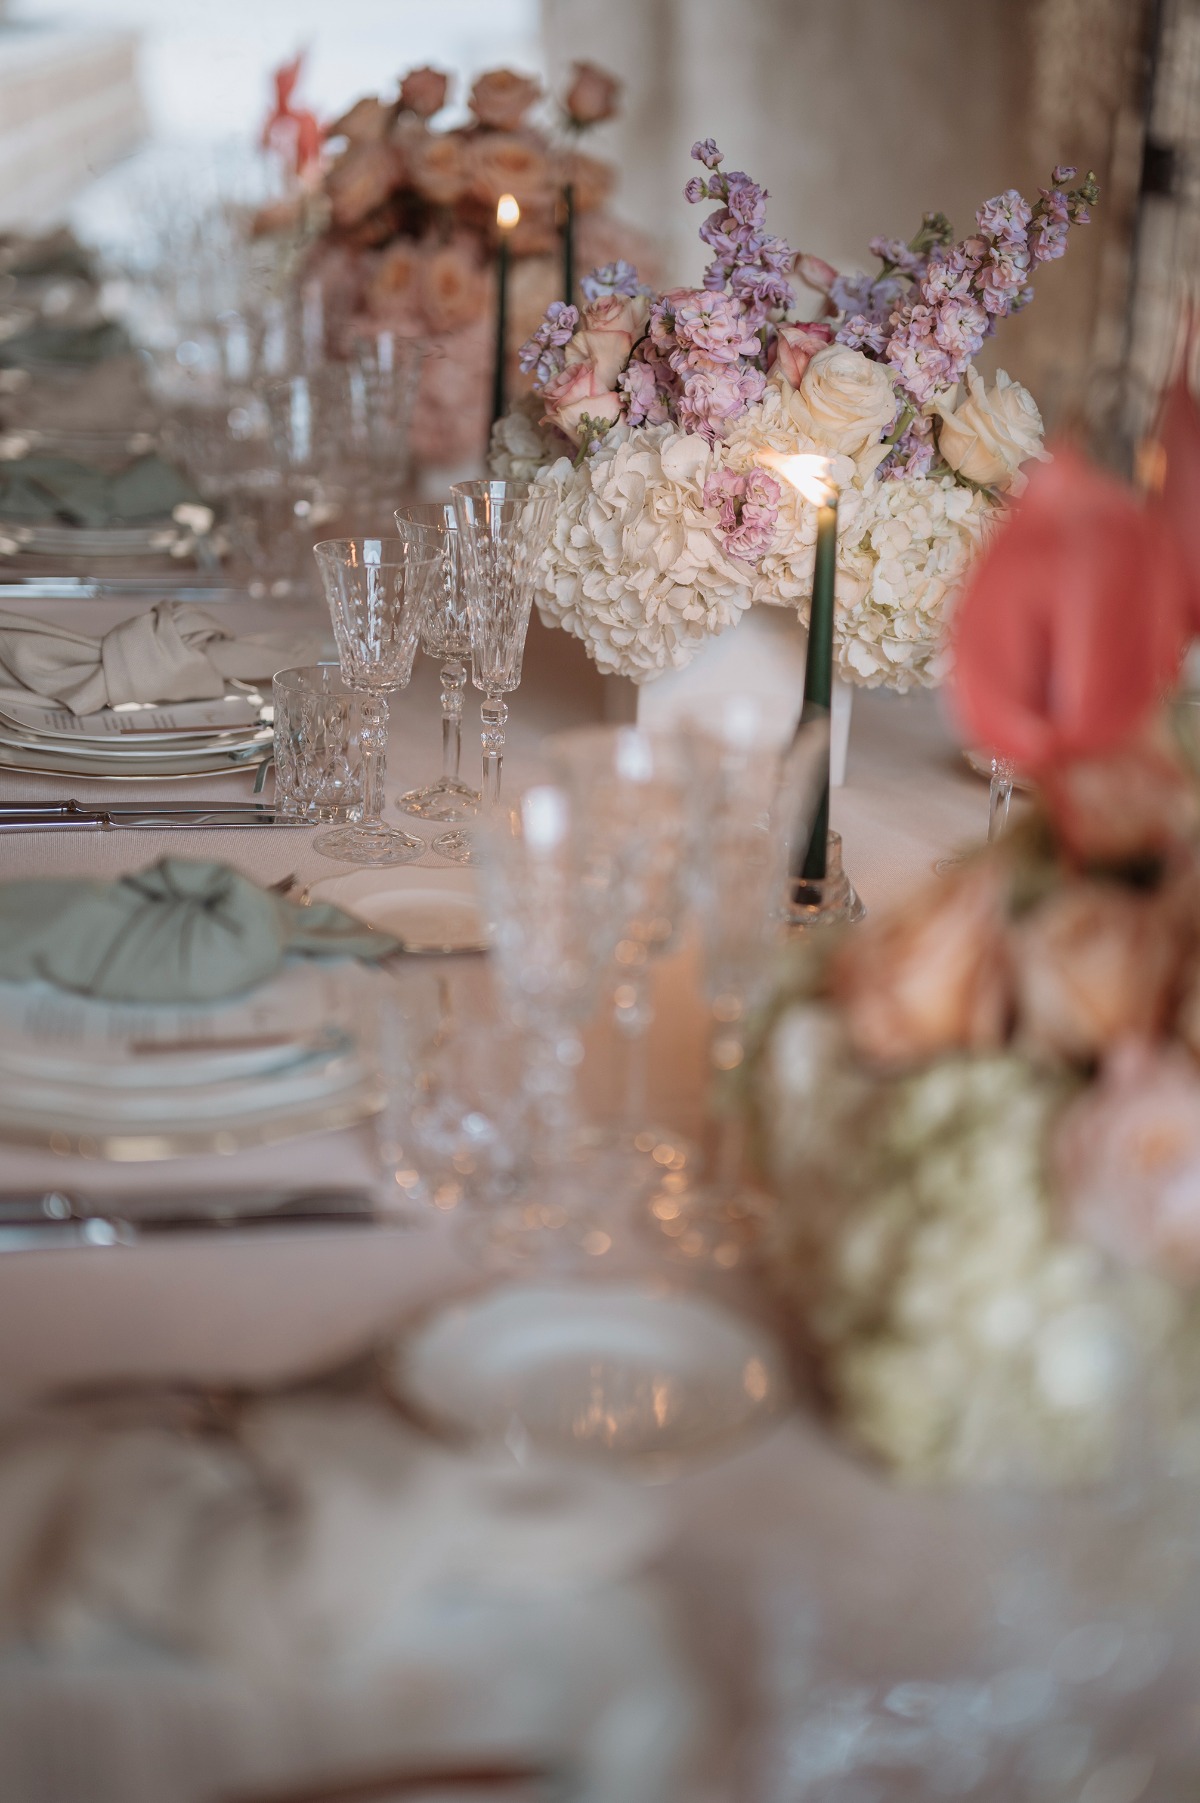 Tablescape with crystal glasses, a candle, and centerpieces